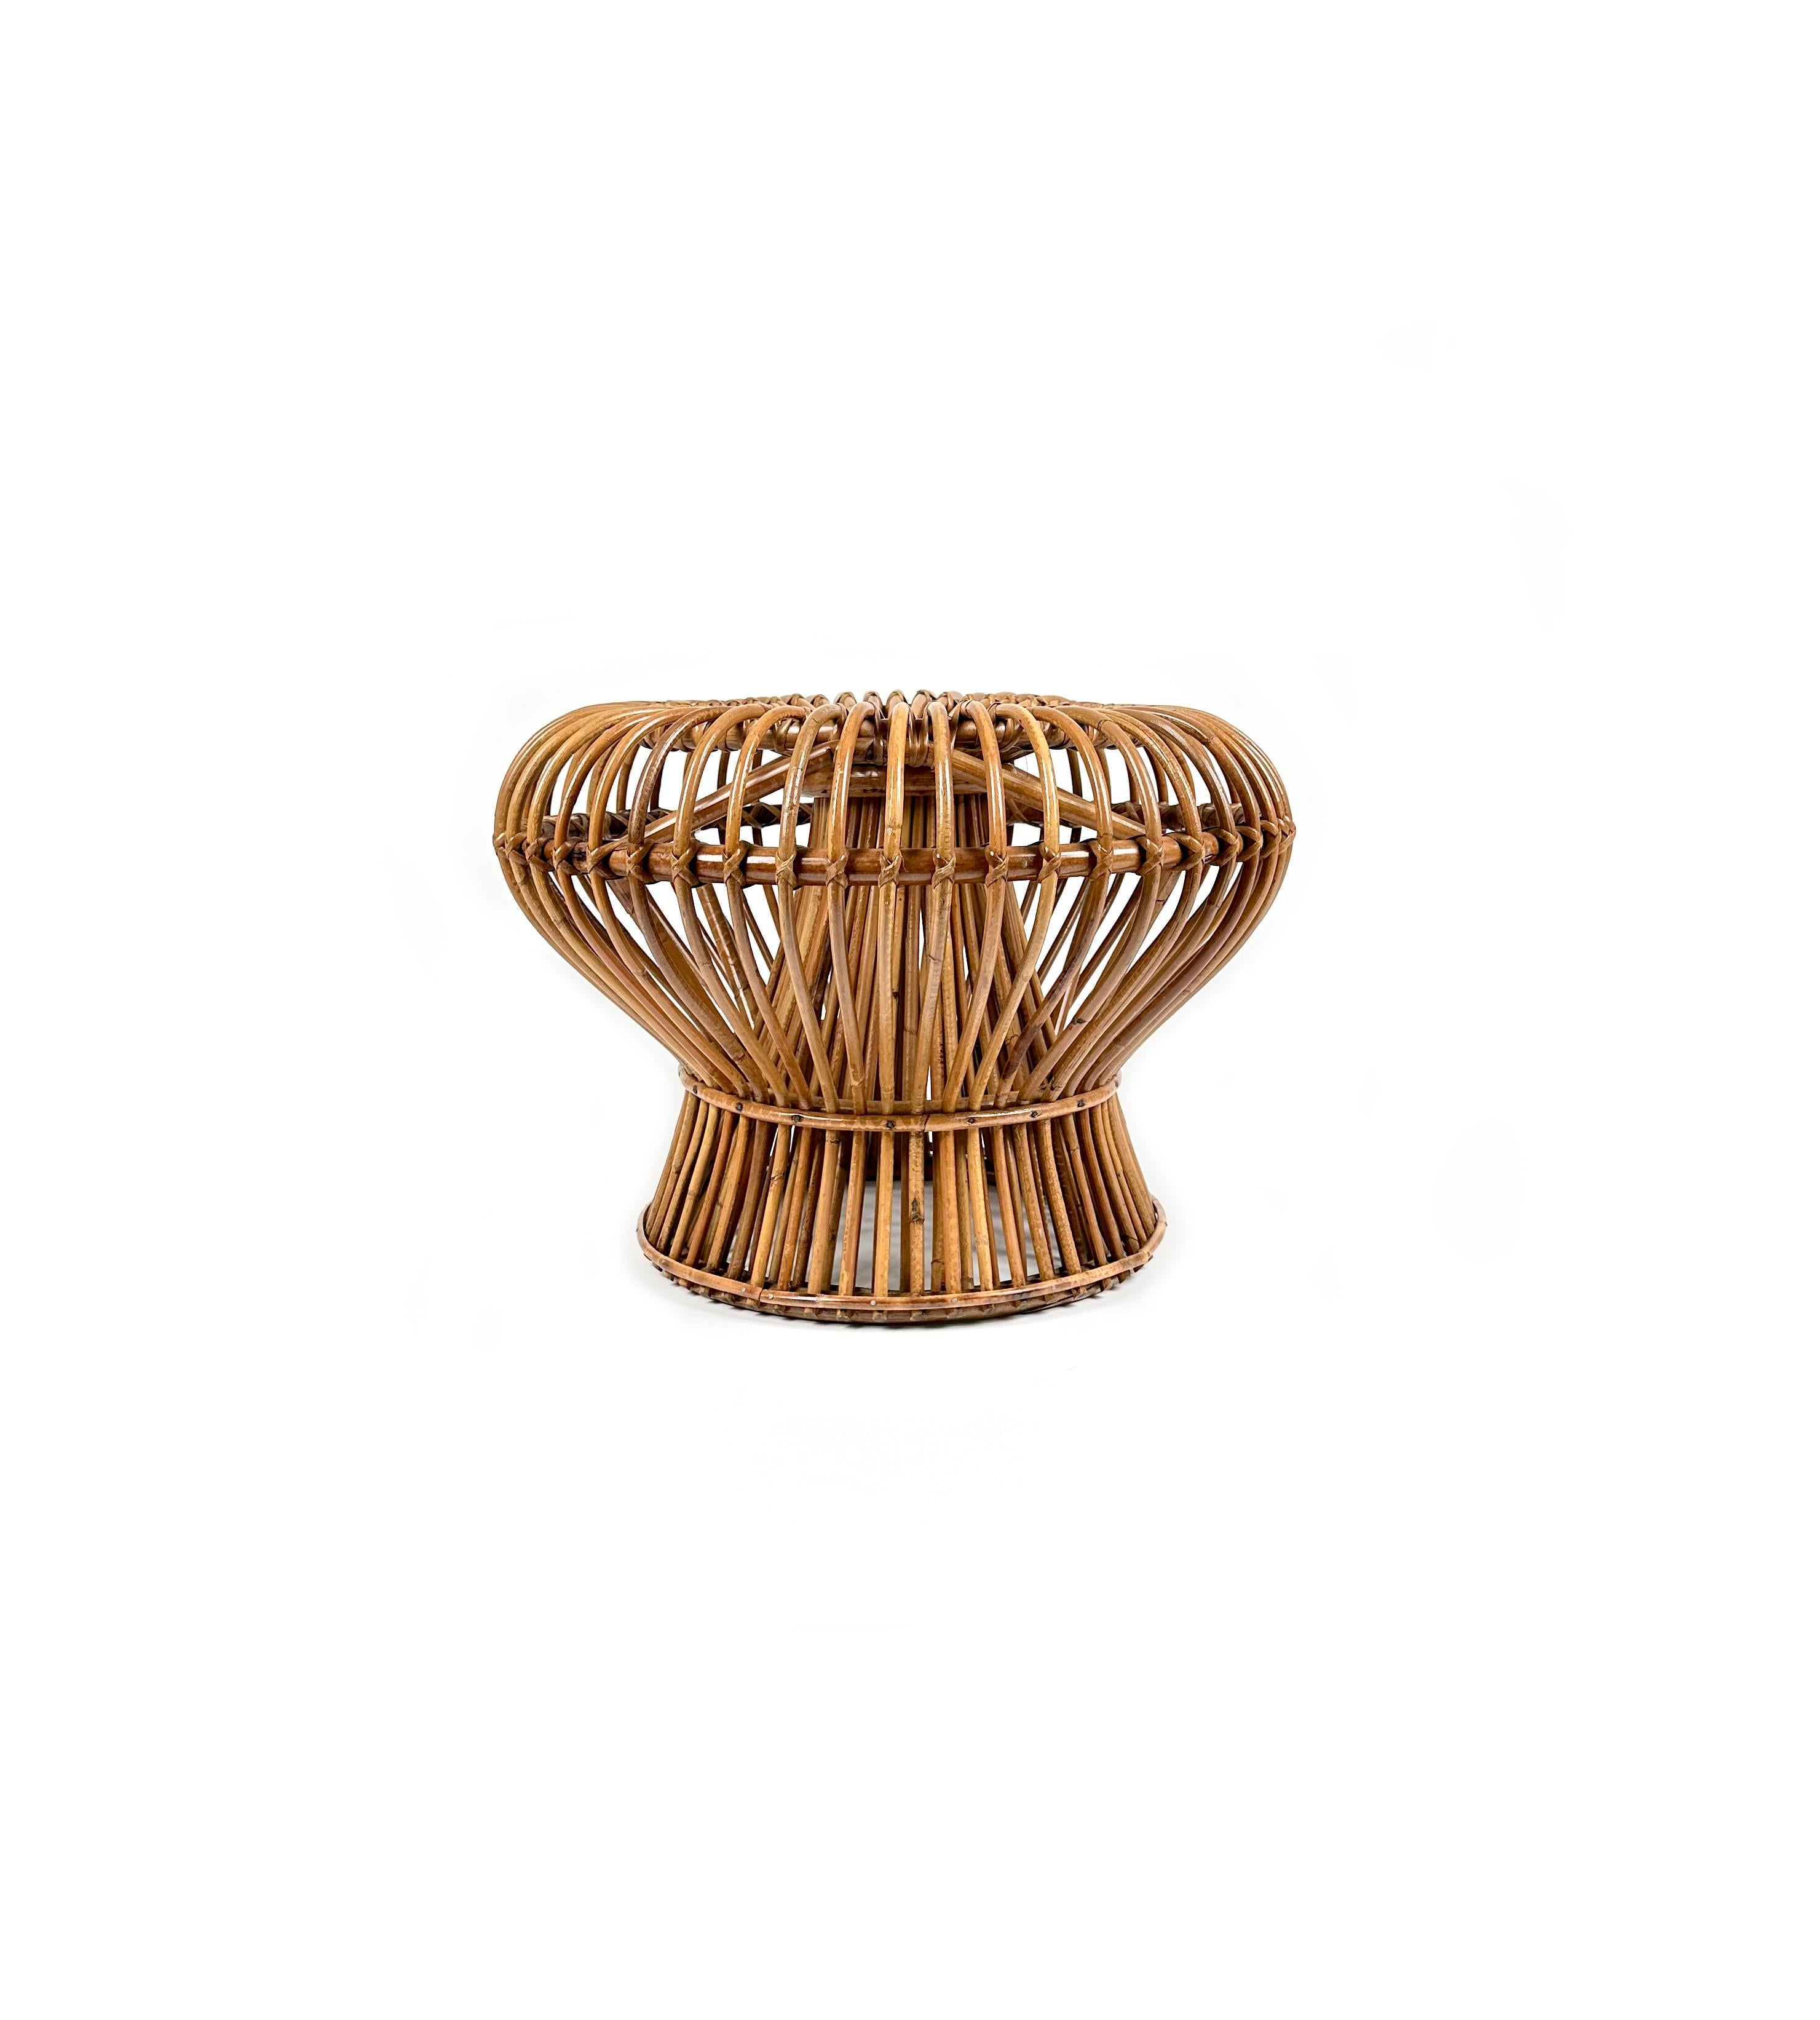 Mid-20th Century Midcentury Ottoman Stool in Bamboo and Rattan Franco Albini Style, Italy, 1960s For Sale